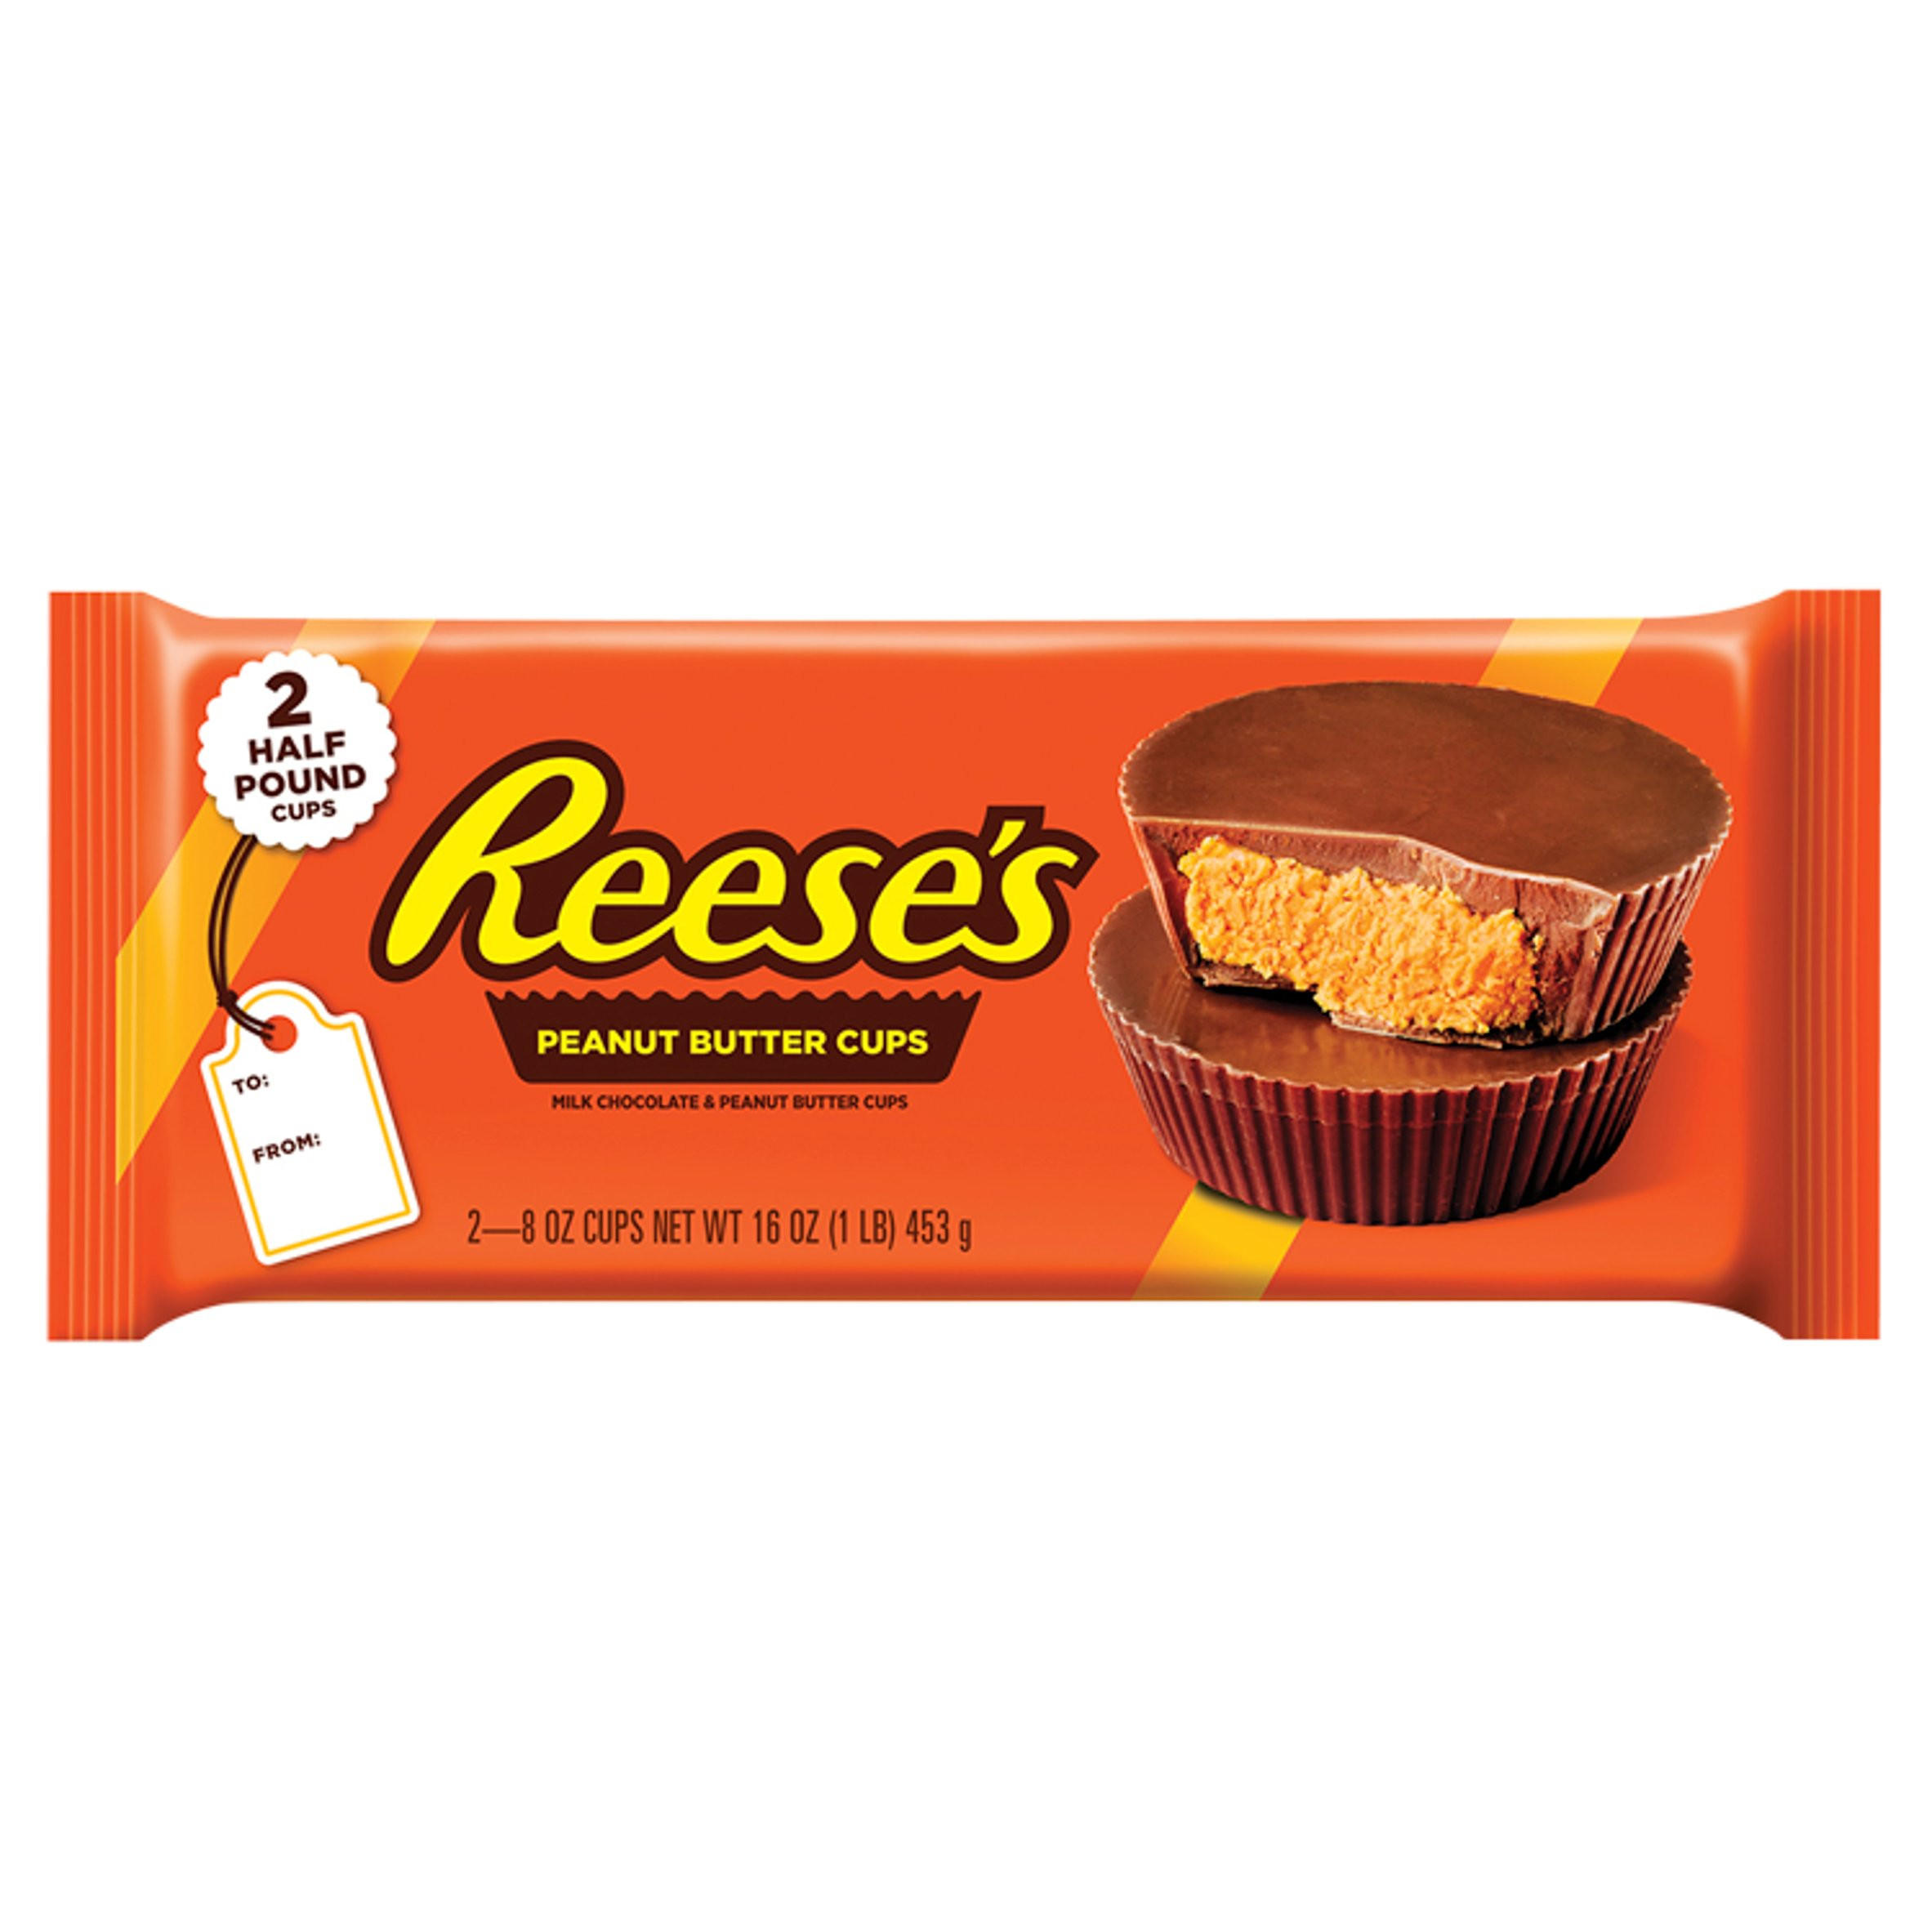 The Mecca of REESE'S Peanut Butter